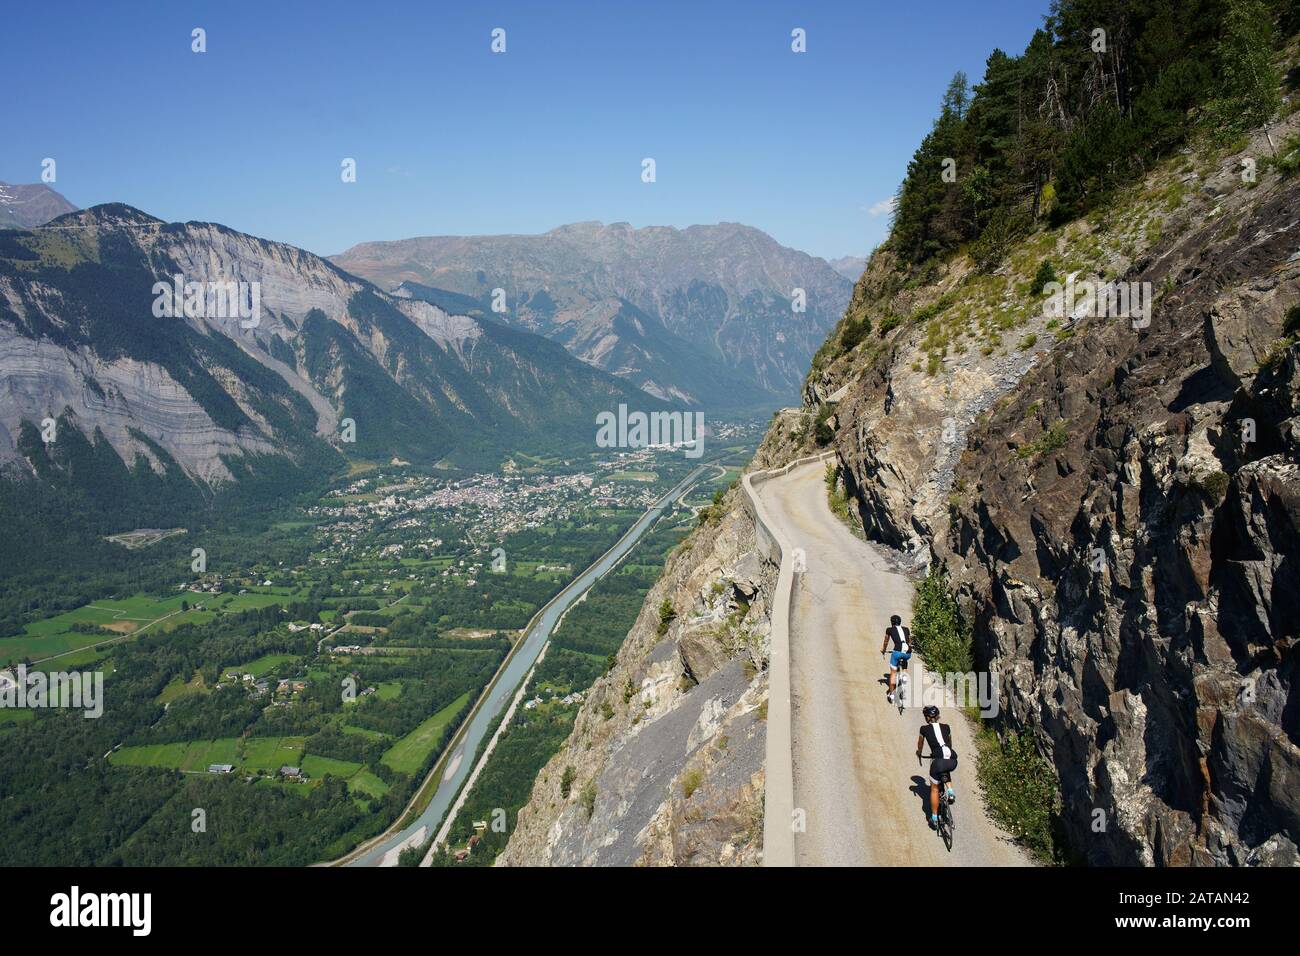 AERIAL VIEW from a 6m mast. Cyclists on a narrow road above a precipitous mountainside. Auris Road, above Le Bourg d'Oisans, France. Stock Photo